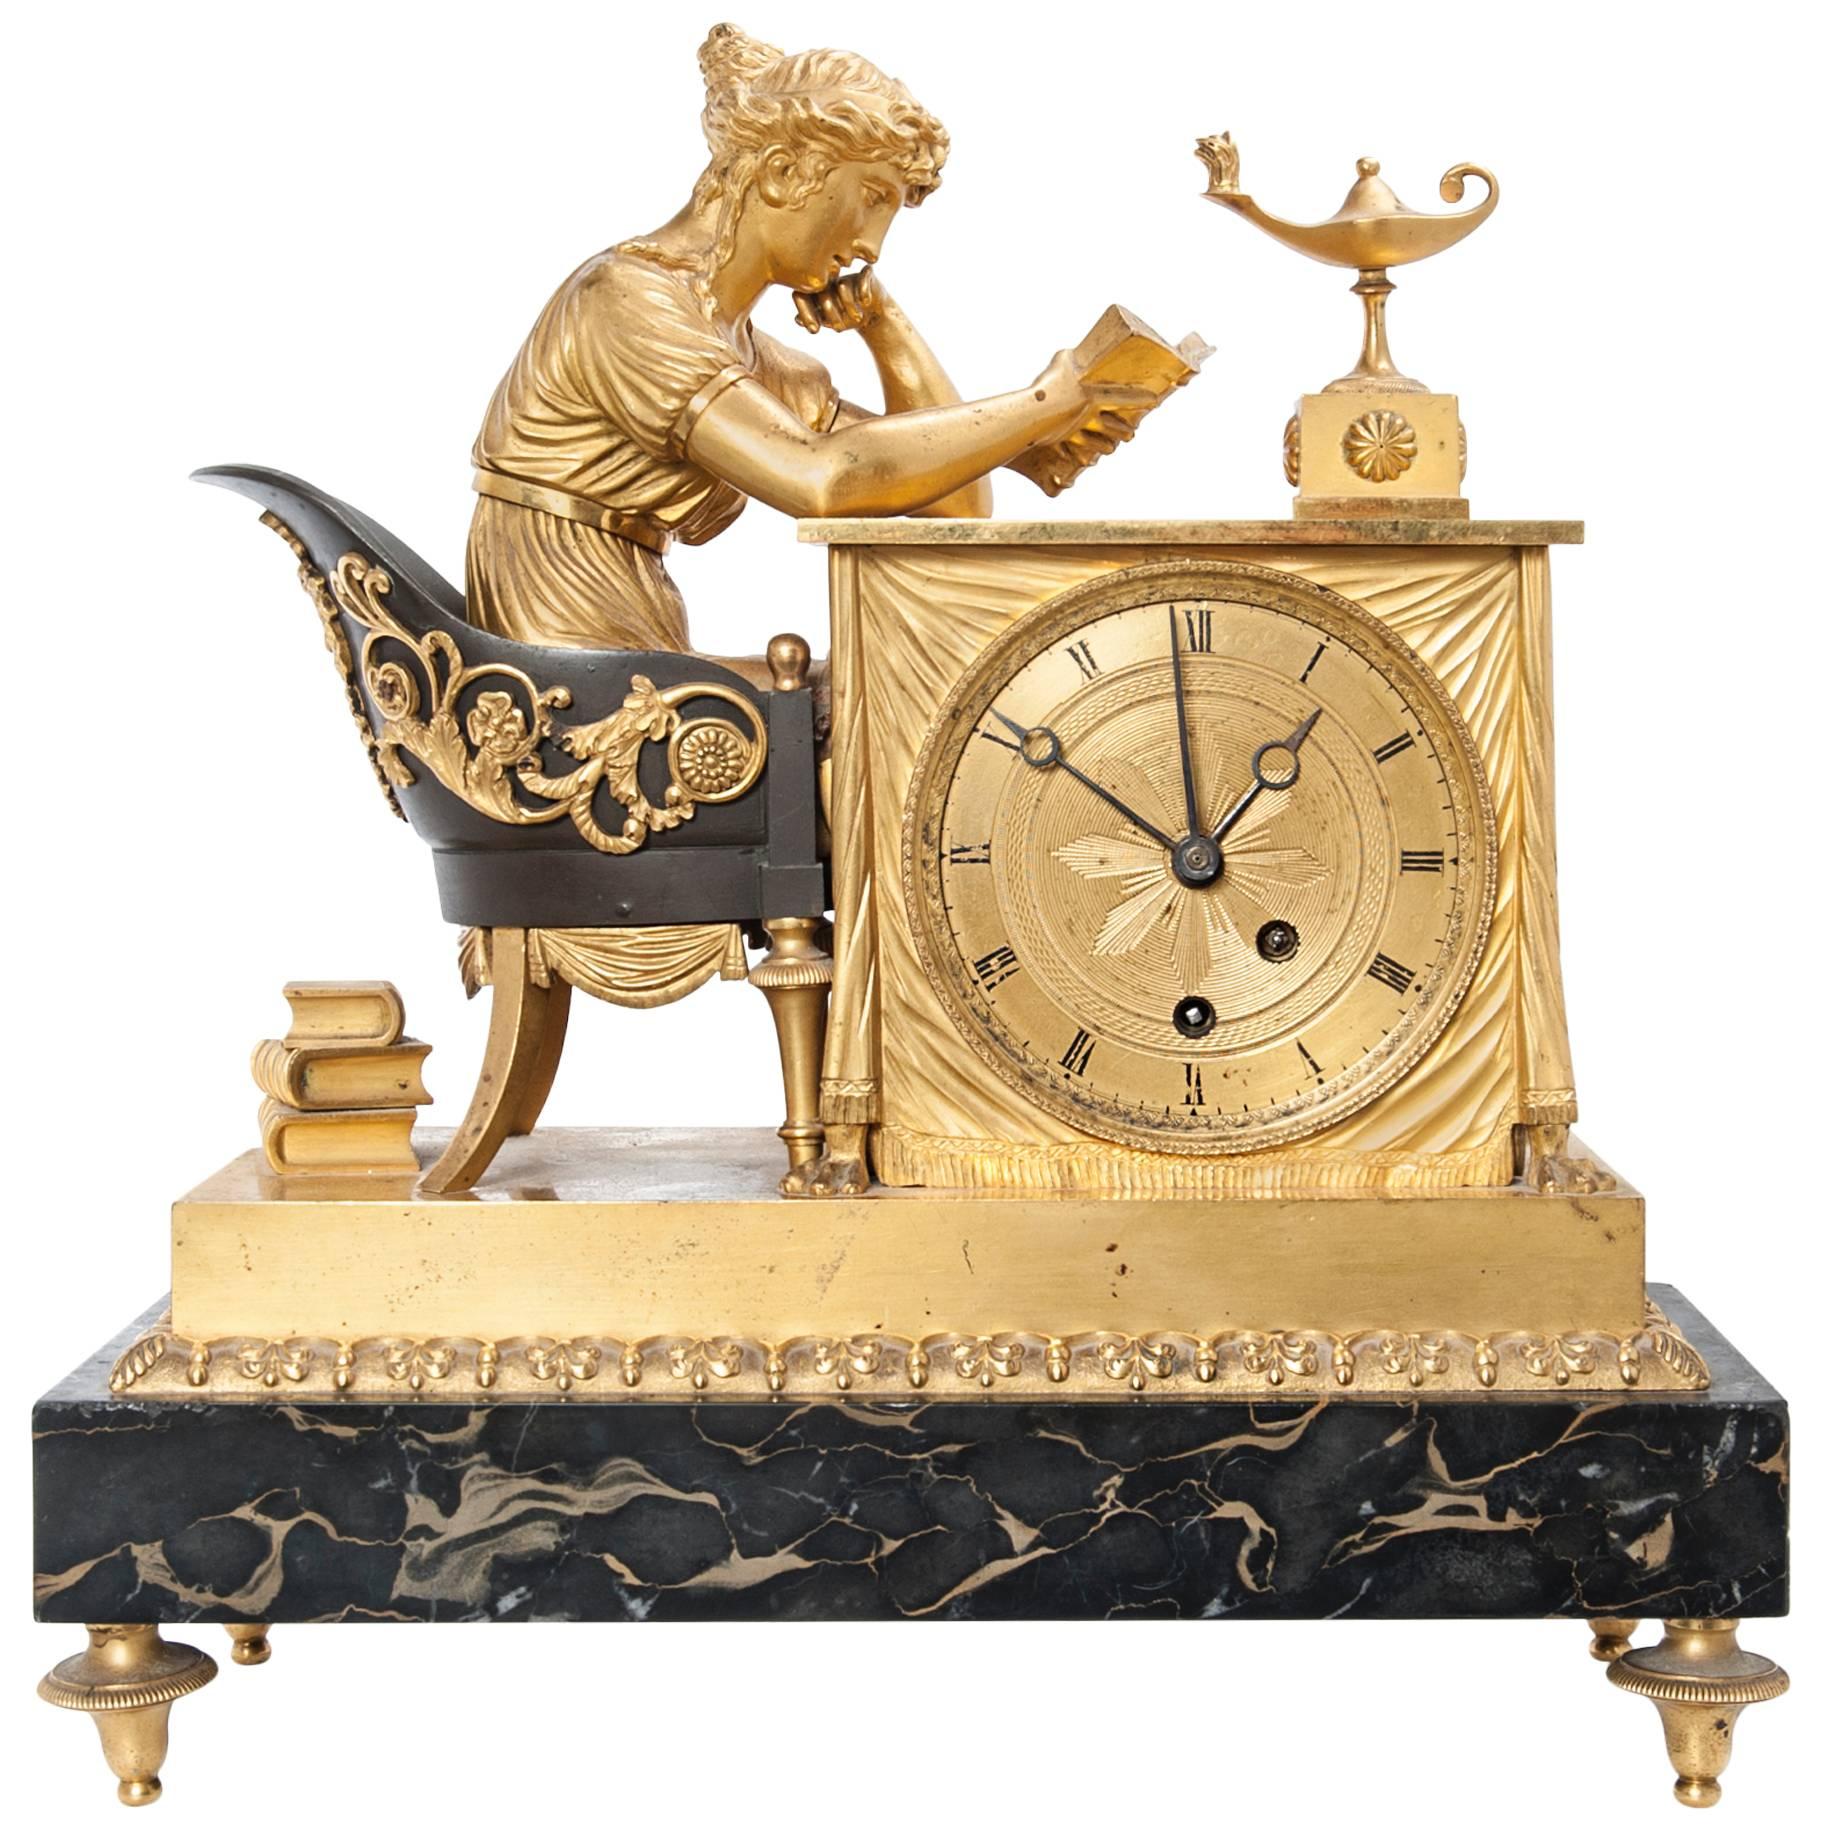 Very Popular, Untouched Library Empire Ormolu Mantel Clock So Called "La Lisse" For Sale